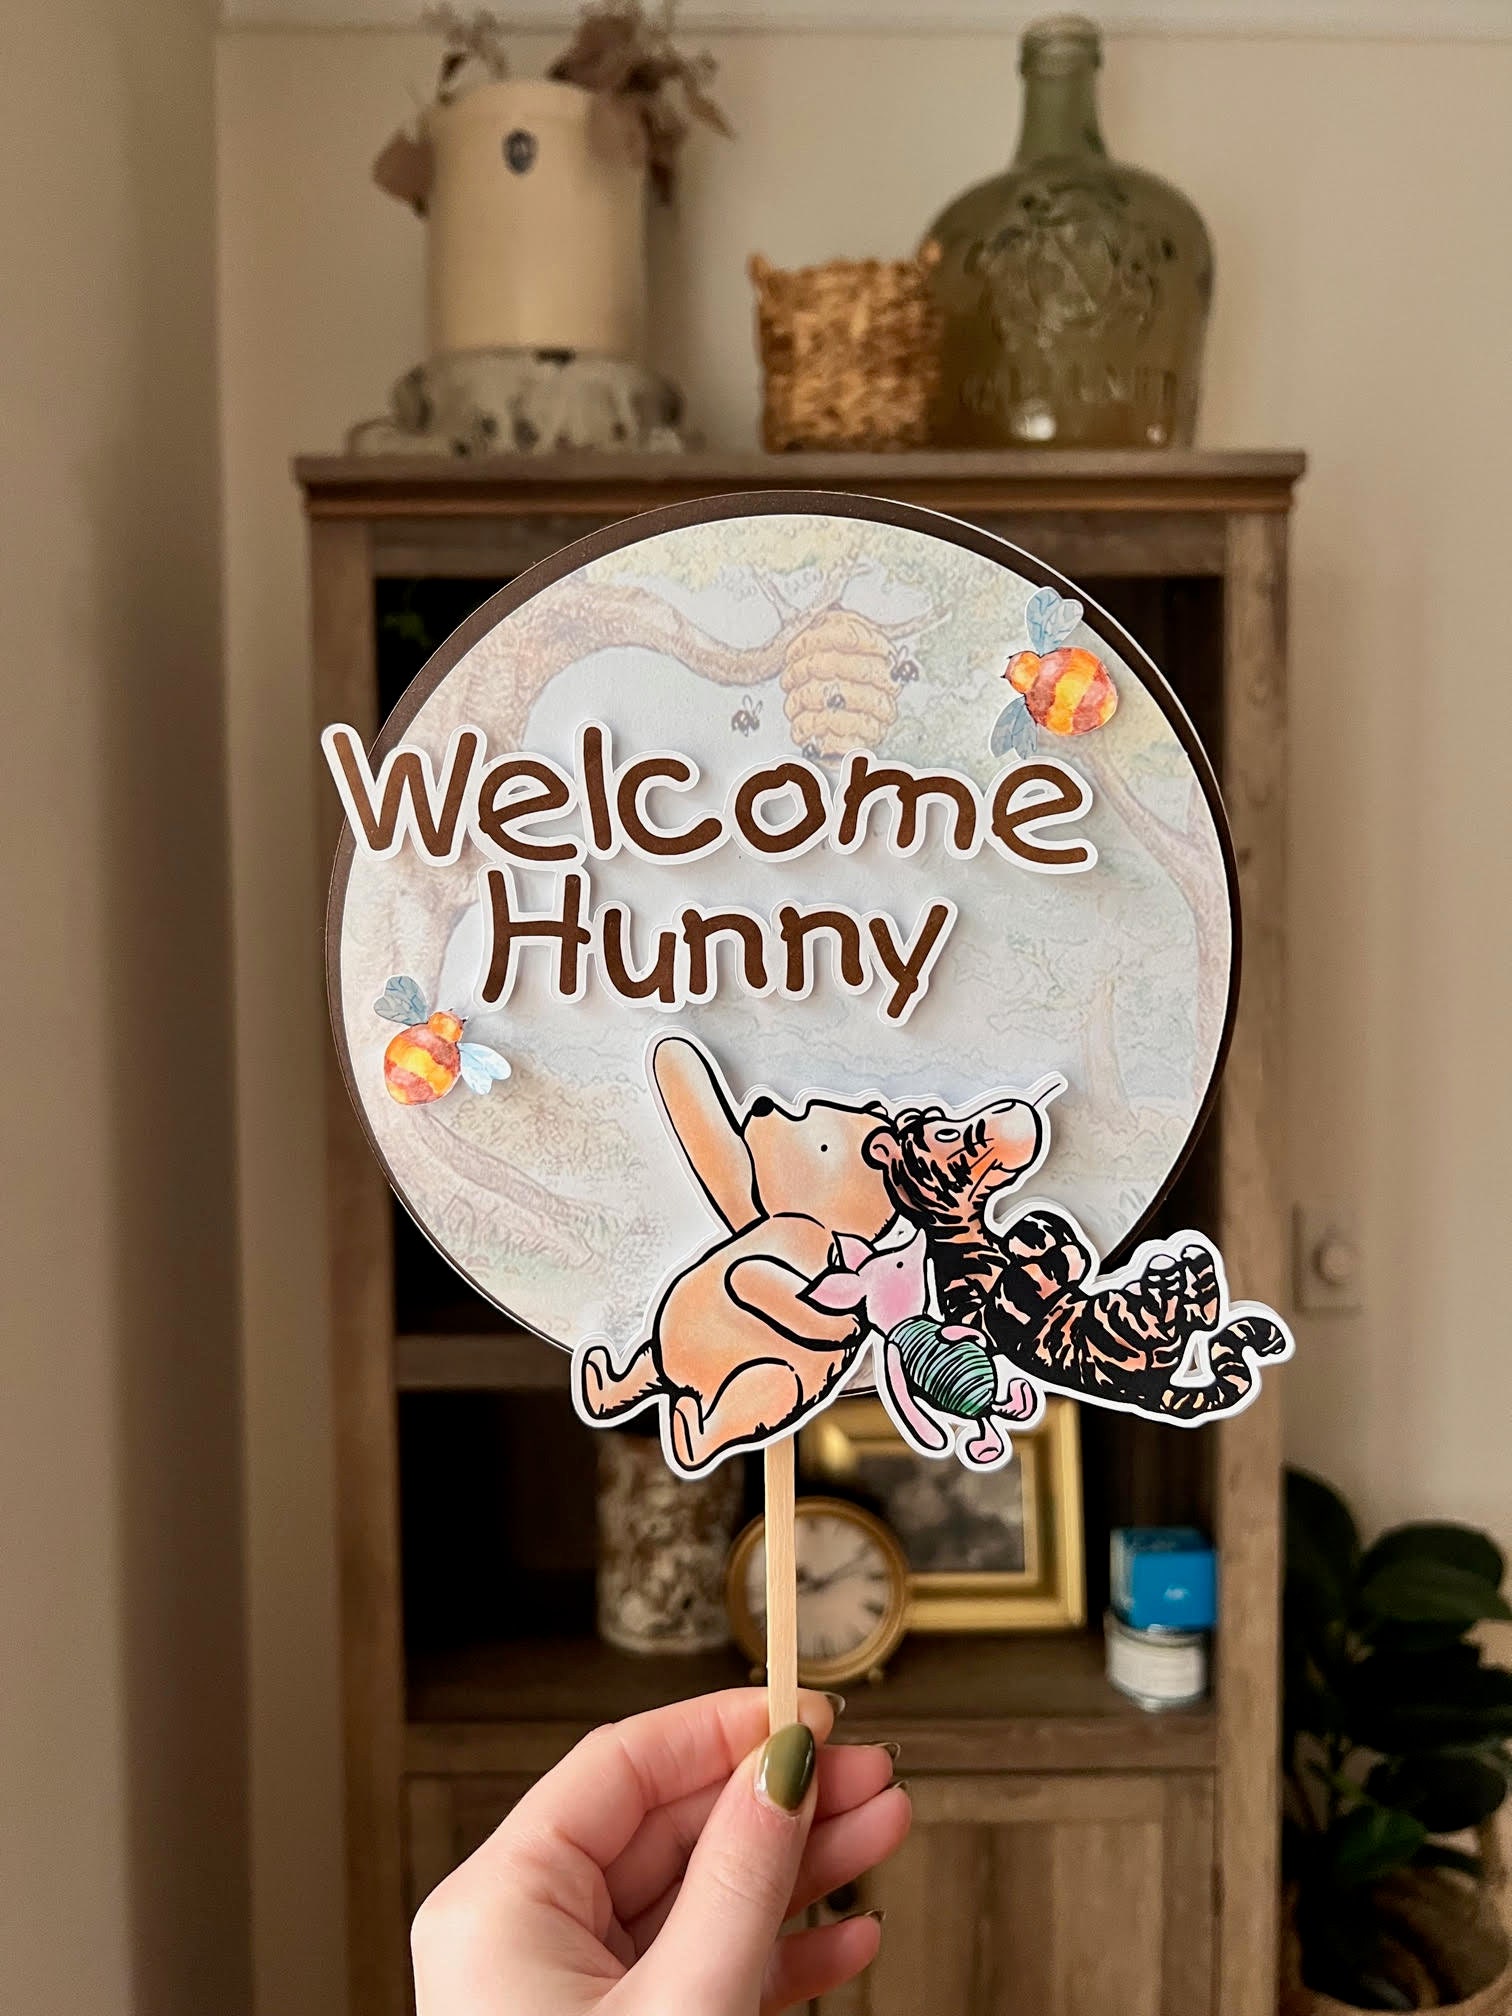  Sweet Baby Co. Classic Winnie the Pooh Baby Shower Decorations  for Girl or Boy with Vintage Welcome Sign Party Decoration Cupcake Toppers  Pooh Bear Backdrop Balloons Bumble Bee Honey Comb Sash